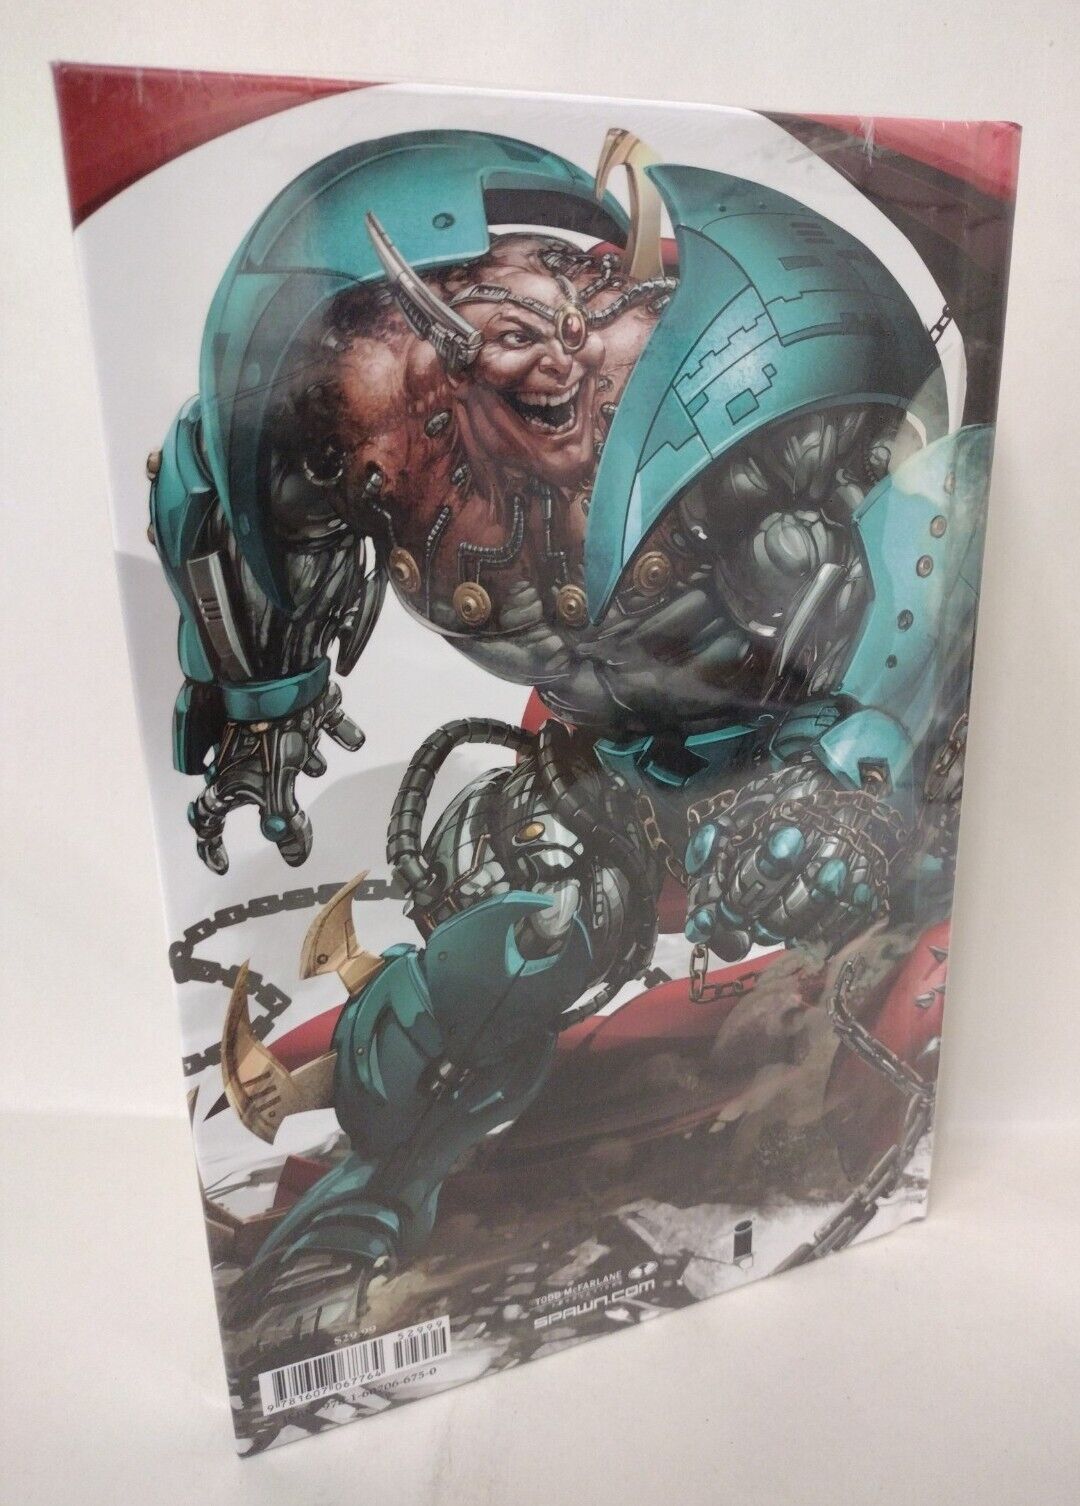 SPAWN ORIGINS COLLECTION VOL 9 HARDCOVER Todd McFarlane 101-111 New SEALED